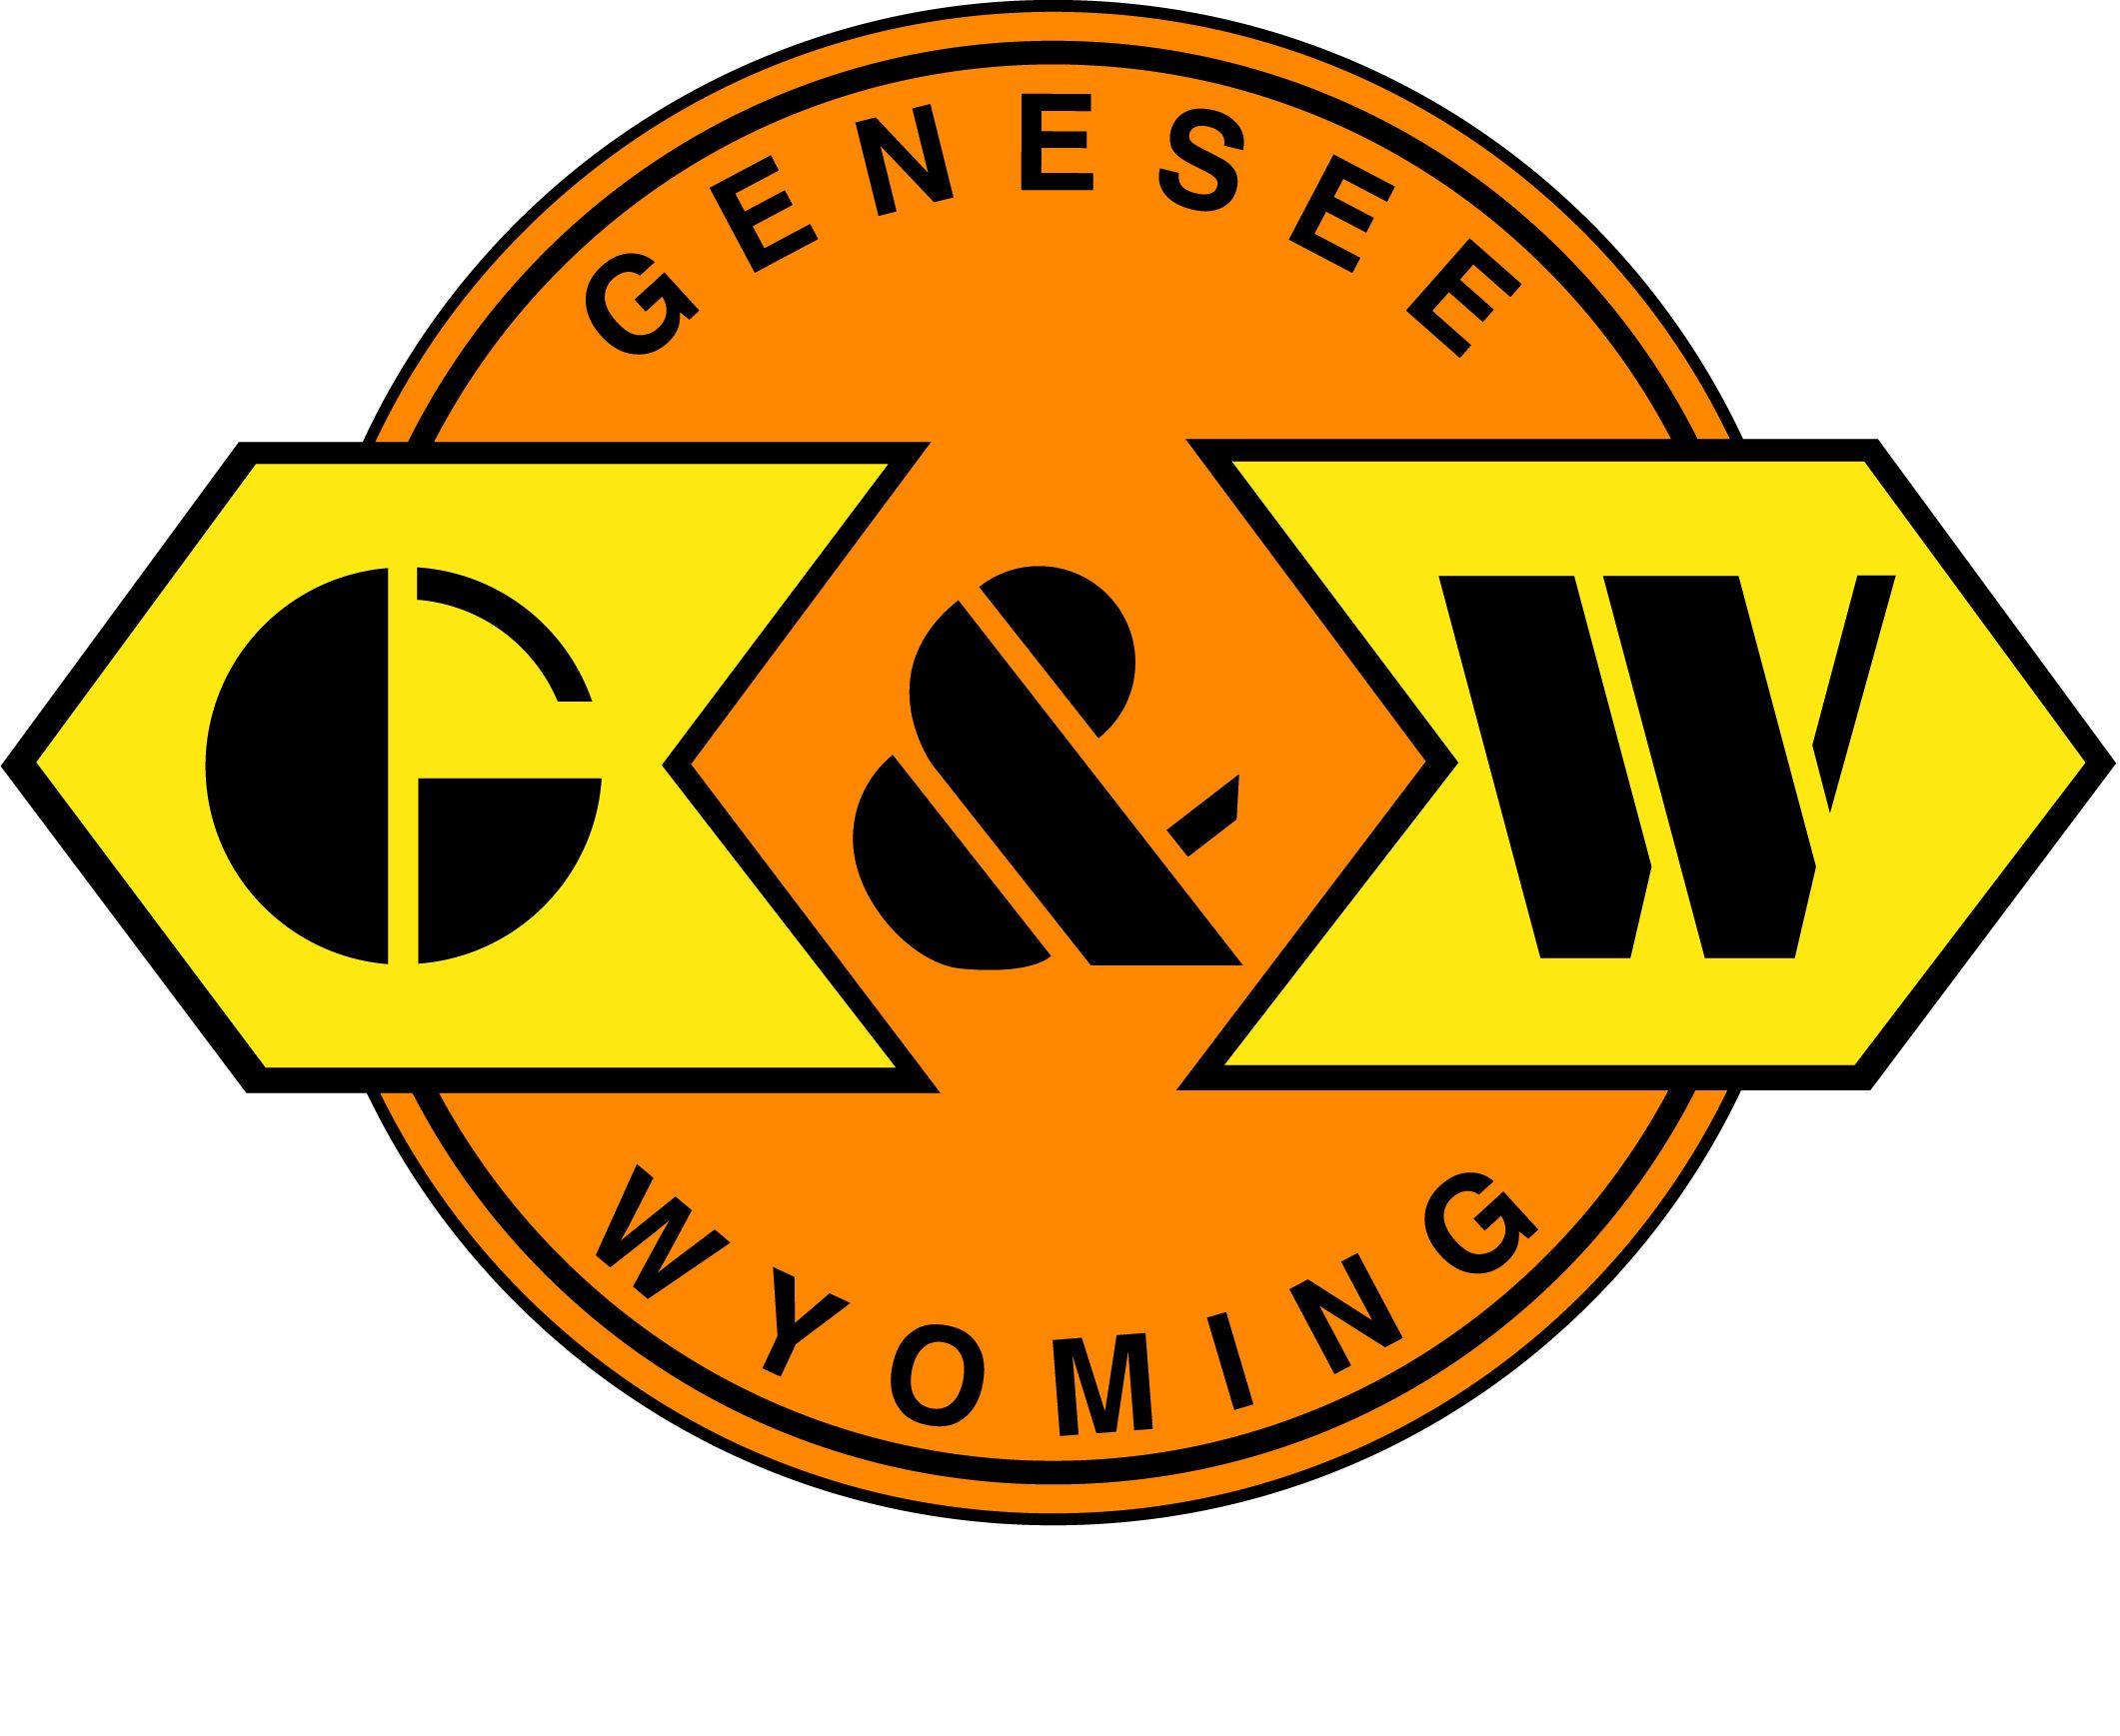 Necr Logo - Genesee & Wyoming Inc. Enters into Agreement to Acquire Providence ...